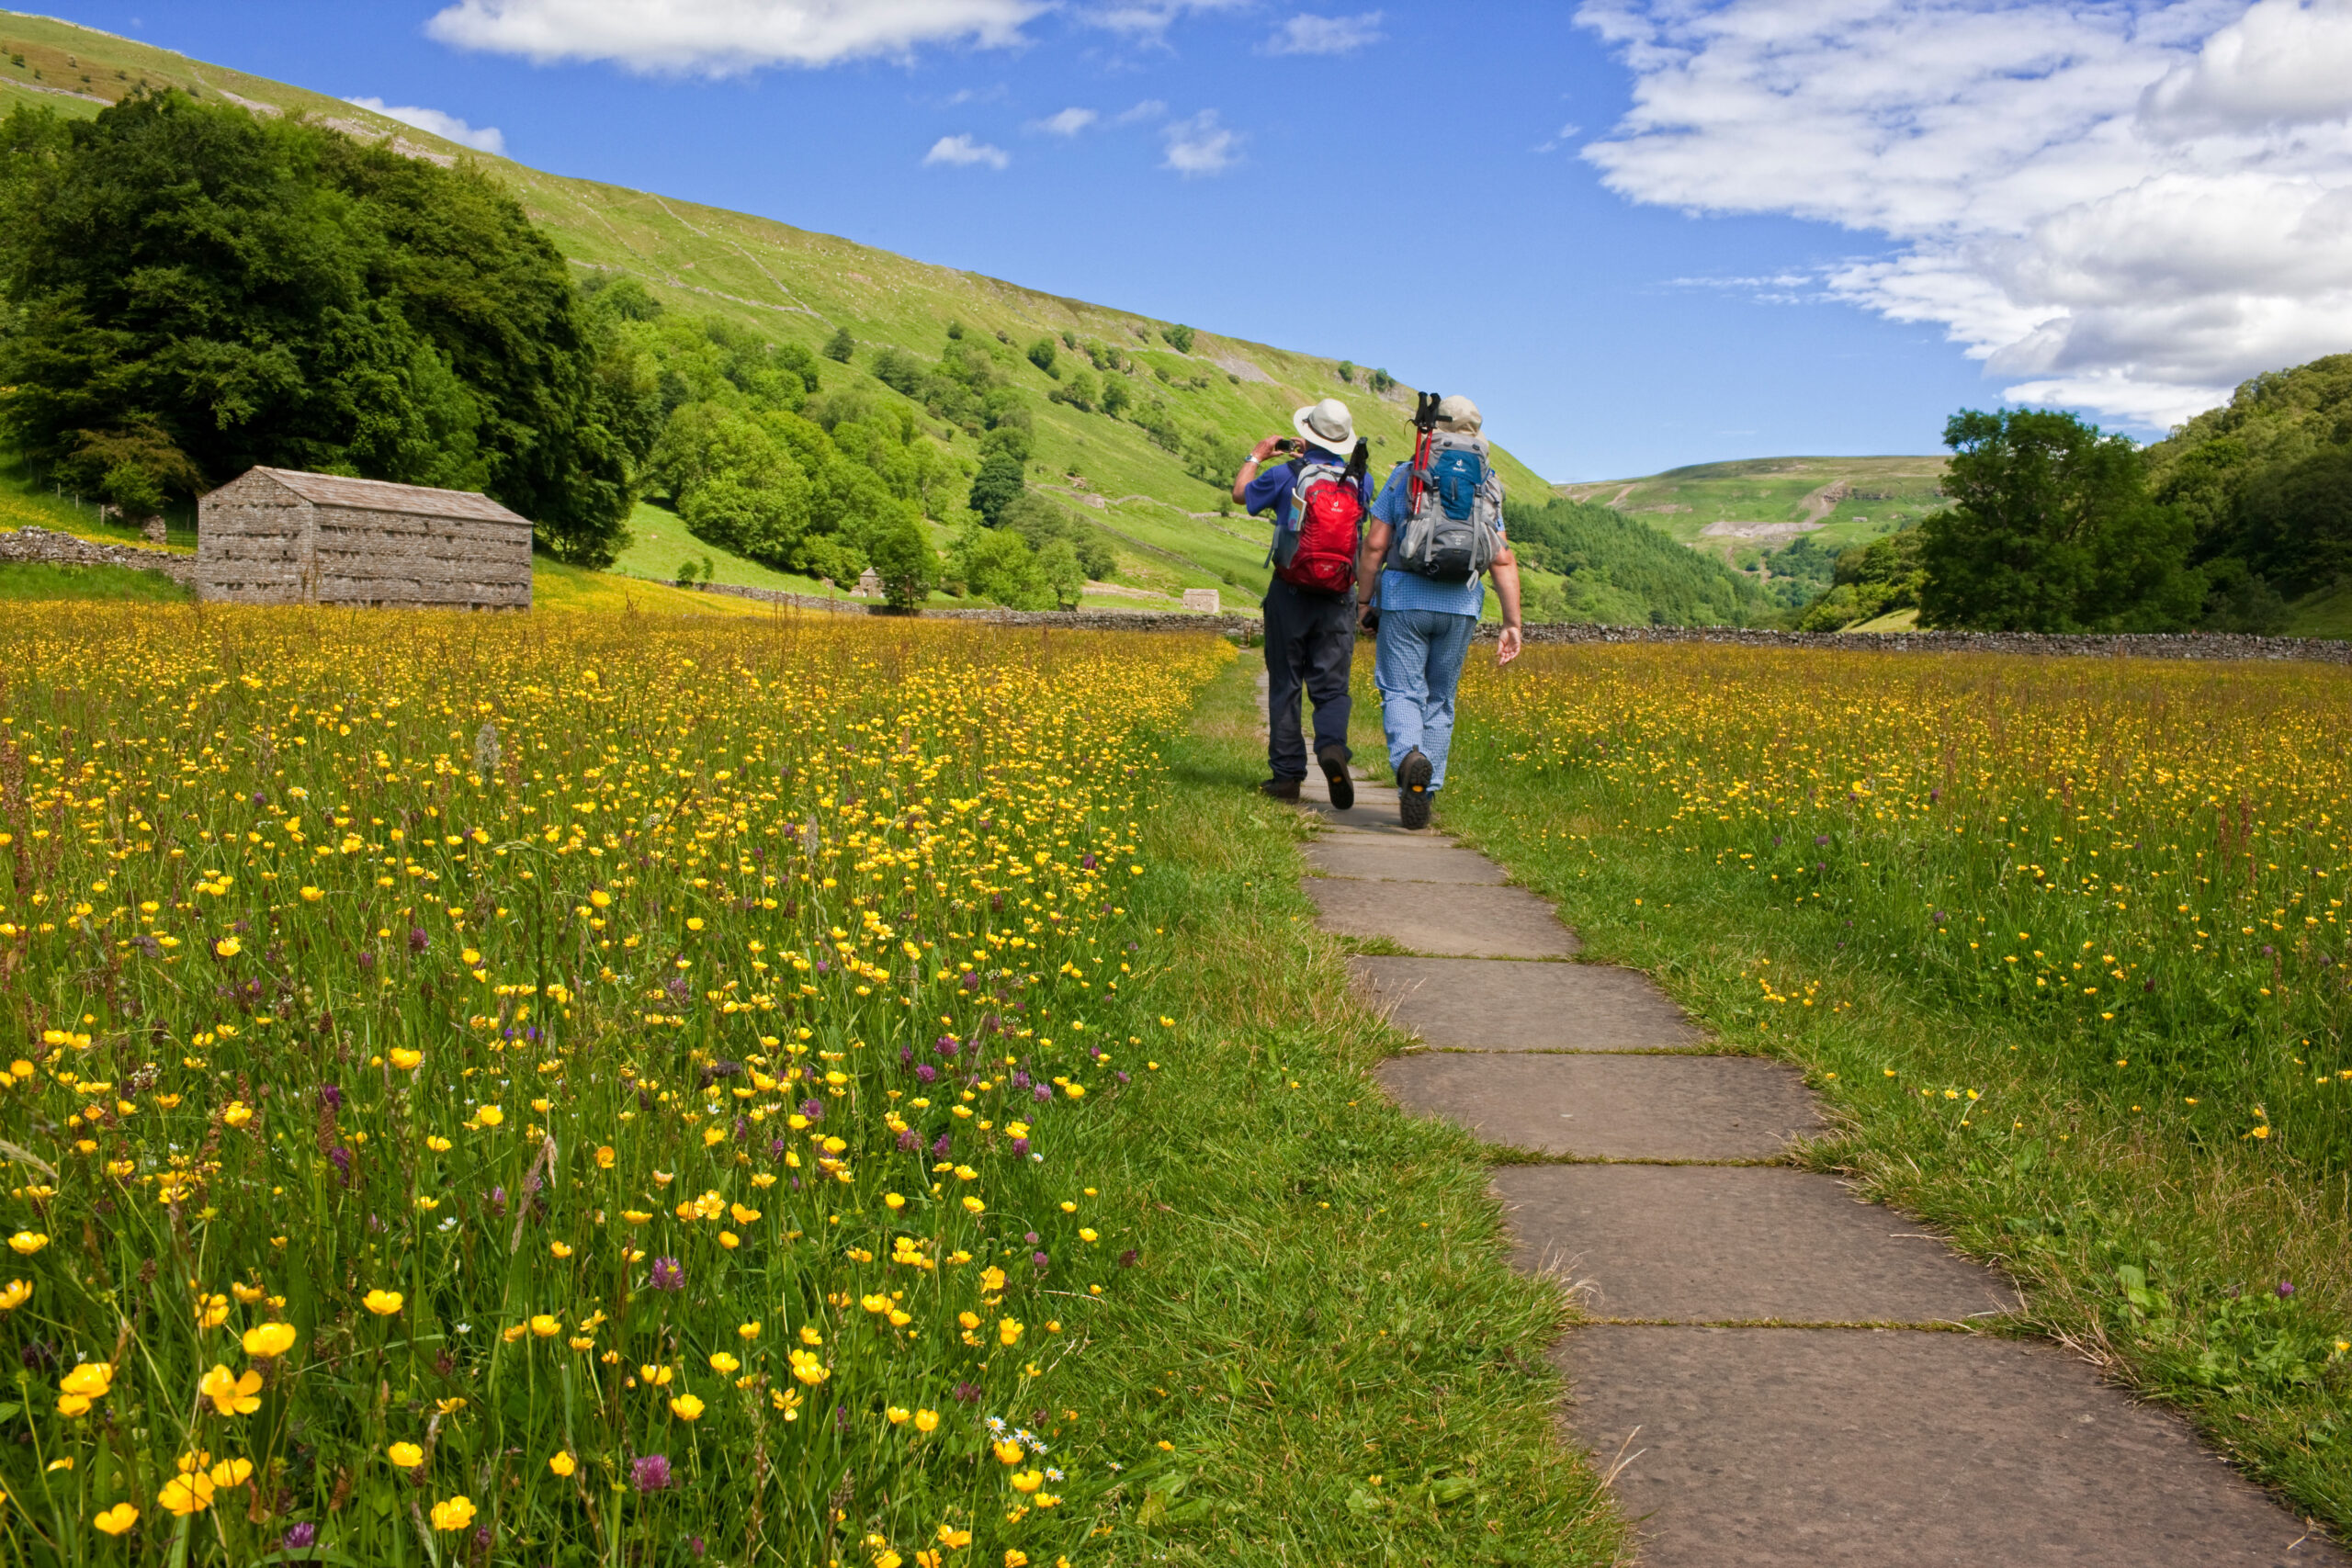 Walking through the flower filled summer hay meadows at Muker, Swaledale in the Yorkshire Dales